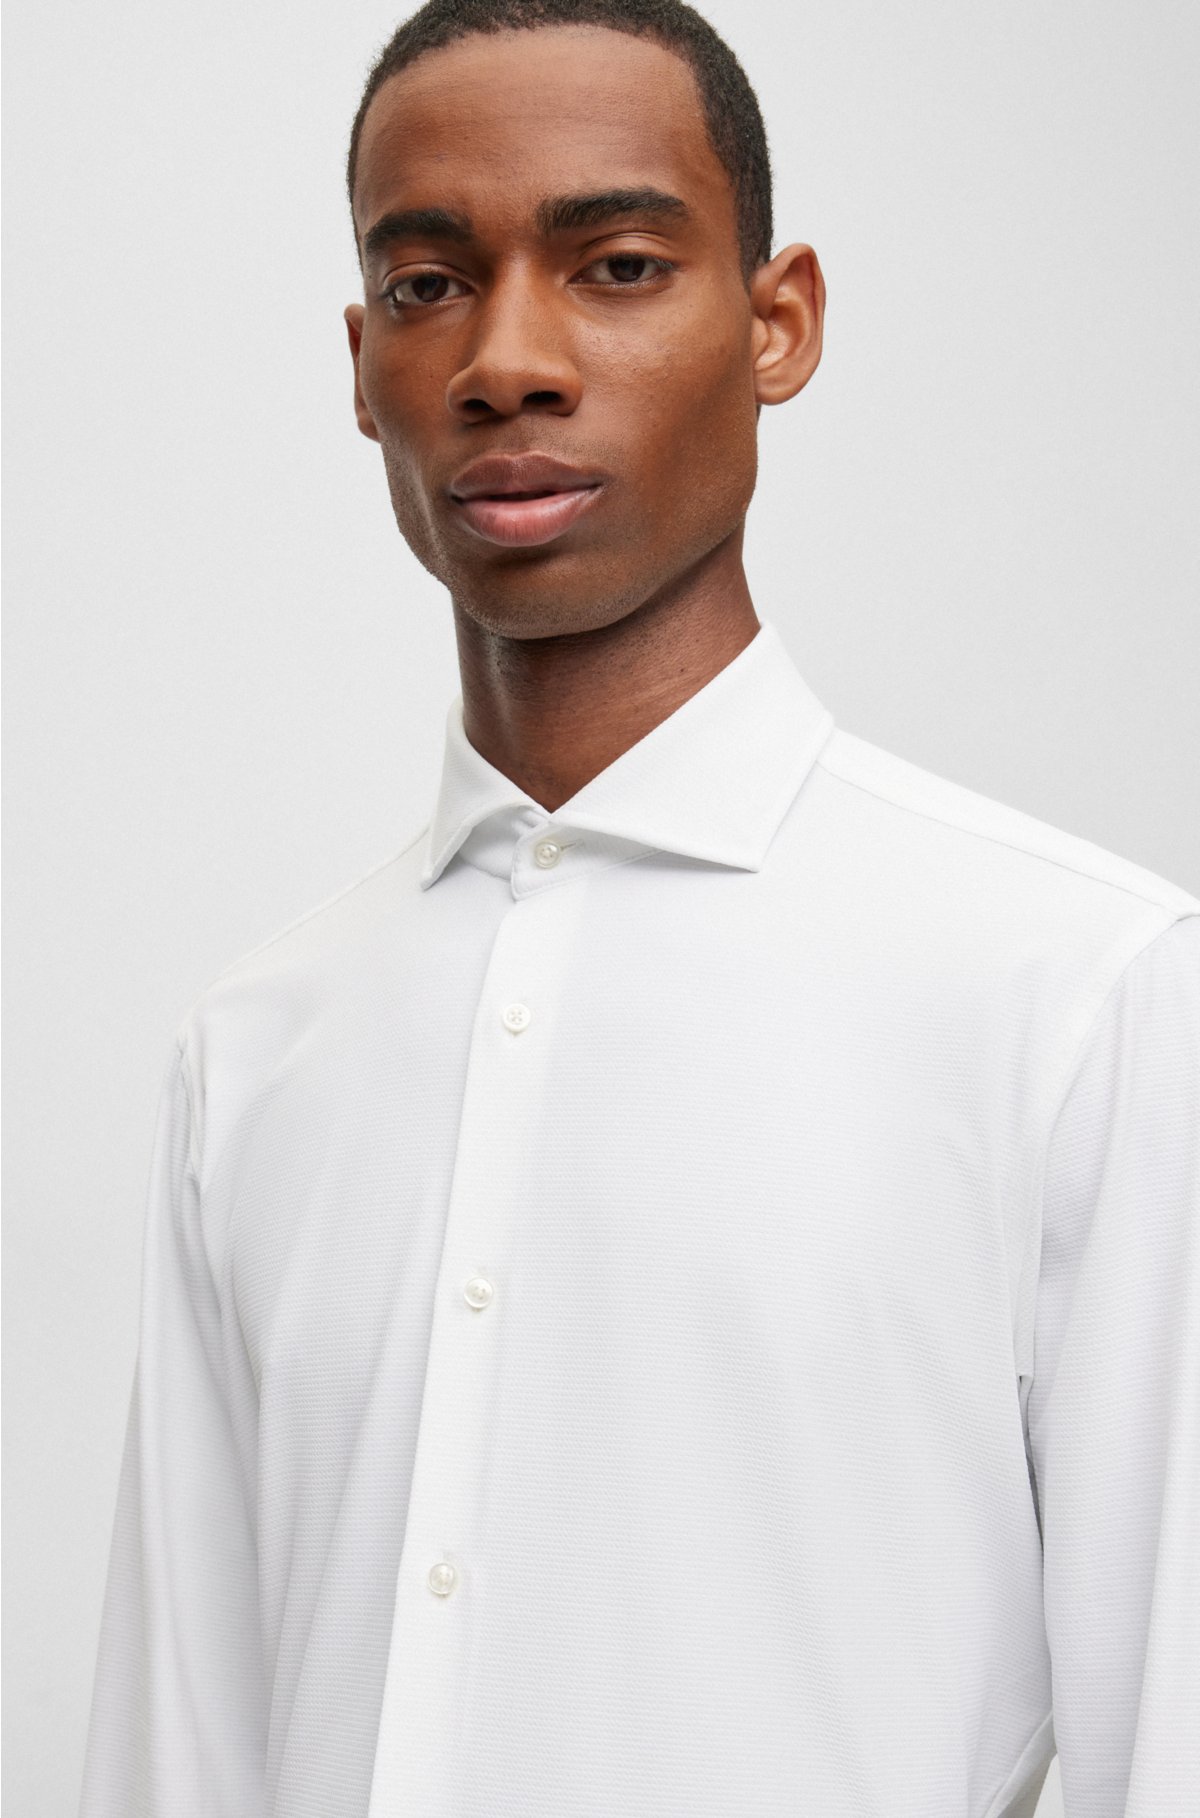 Regular-fit shirt in structured performance-stretch material, White